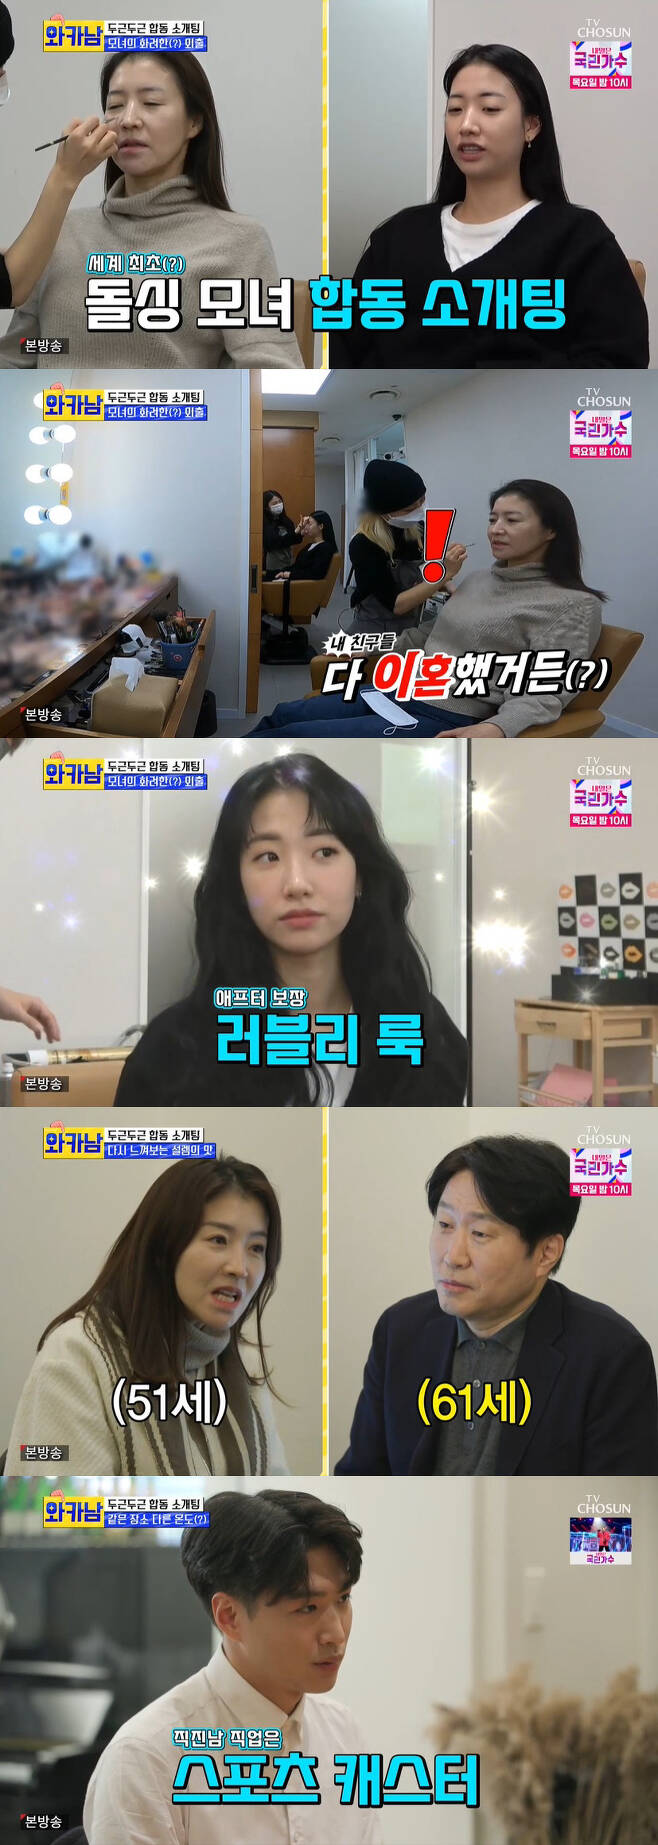 wakanam Bae Soo-jin, Ahn Hyun-ju and Kang Hye-yeon have started their first blind date.On the 23rd TV Chosun entertainment program wakanam, the blind date scene of Ahn Hyun-ju Bae Soo-jin mother and daughter was revealedThe Ahn Hyun-ju Bae Soo-jin mother and daughter sat side by side and prepared for a blind date with makeup; Bae Soo-jin said, Im the first blind date.It would be the first time to blind date with my mother and daughter. Ahn Hyun-ju said, I was the first. I did not tell anyone. I could not.My friends are all divorced. I refused to do blind date, but I will do it. Bae Soo-jin said of his ideal type, I like the style of Jung Kyung Ho.I like people who like father eyes, he said.Father is not gentle to be an eye, said Bae Dong-sung, and Ahn Hyun-ju laughed at Thats your idea .My mother still does not seem to have a male eye, said Ahn Hyun-ju, who was frustrated, Thats right, why are fraudsters coming?The same place was sitting in front of Bae Soo-jin while mother Ahn Hyun-ju watched.Bae Soo-jins blind date opponent was a sportscaster and in-house announcer; the two continued their warm atmosphere, praising each other.Bae Soo-jins blind date opponent went to greet the two people when he knew that Ahn Hyun-ju was also doing blind date behind him.The four people who gathered naturally went to the Double Jeopardy date for the second time.What if I actually see Bae Soo-jin? asked Ahn Hyun-ju, and the opponent replied, It is a natural story, but the real thing is more beautiful.I also asked about the idea of Dolsing: the unmarried blind date opponent said, Its not wrong, its something else, its the difference of thought, I dont care, which made Ahn Hyun-ju happy.Ahn Hyun-ju said: I was so heartbroken because I watched my marriage for two years and it felt like I was looking at me.My daughter has a lot of work to do at that age, but after I got divorced, I became active. I was divorced late, so I could not do anything.I am actively encouraging you to do what you can and can learn at this age. Ahn Hyun-ju said that he would take care of his grandson, Rayun.Eungaeun and This level stepped out as cupids of Kang Hye-yeons love.Kang Hye-yeon actively said, I have never done a blind date, but if my sister introduces me, I will (I will). Kang Hee-yeons ideal type is Kang Jung-seok and judo player Ahn Chang-rim.This level promised to blind date unconditionally.It became a long-awaited blind date day. Kang Hye-yeon arrived with a thrilling heart, Have you finally dreamed of it?Kang Hye-yeon met this level and Eun Yeon in advance and decided to send a signal to Coca-Cola if he liked his opponent and to Cider if he did not like it.Kang Hye-yeons blind date partner was a lawyer who attracted attention with a tall physical over 180cm.Kang Hye-yeon ordered Coca-Cola to see if his opponent liked it.The two of them continued their conversation naturally with the story of exercise: the two of them, who were curious about their sweet atmosphere, eventually approached them and naturally (?)I went to the Double Jeopardy date.The four of them were headed for an amusement park. The four of them went to the disco panfang with excitement.Unlike the cheerful Kang Hye-yeon couple, the Eungai This level couple laughed at each other in a battle without being able to keep their bodies properly.The blind date opponent took Kang Hye-yeon home and asked for contact information, and This level Eun Ga-eun looked at the two people with a good look.